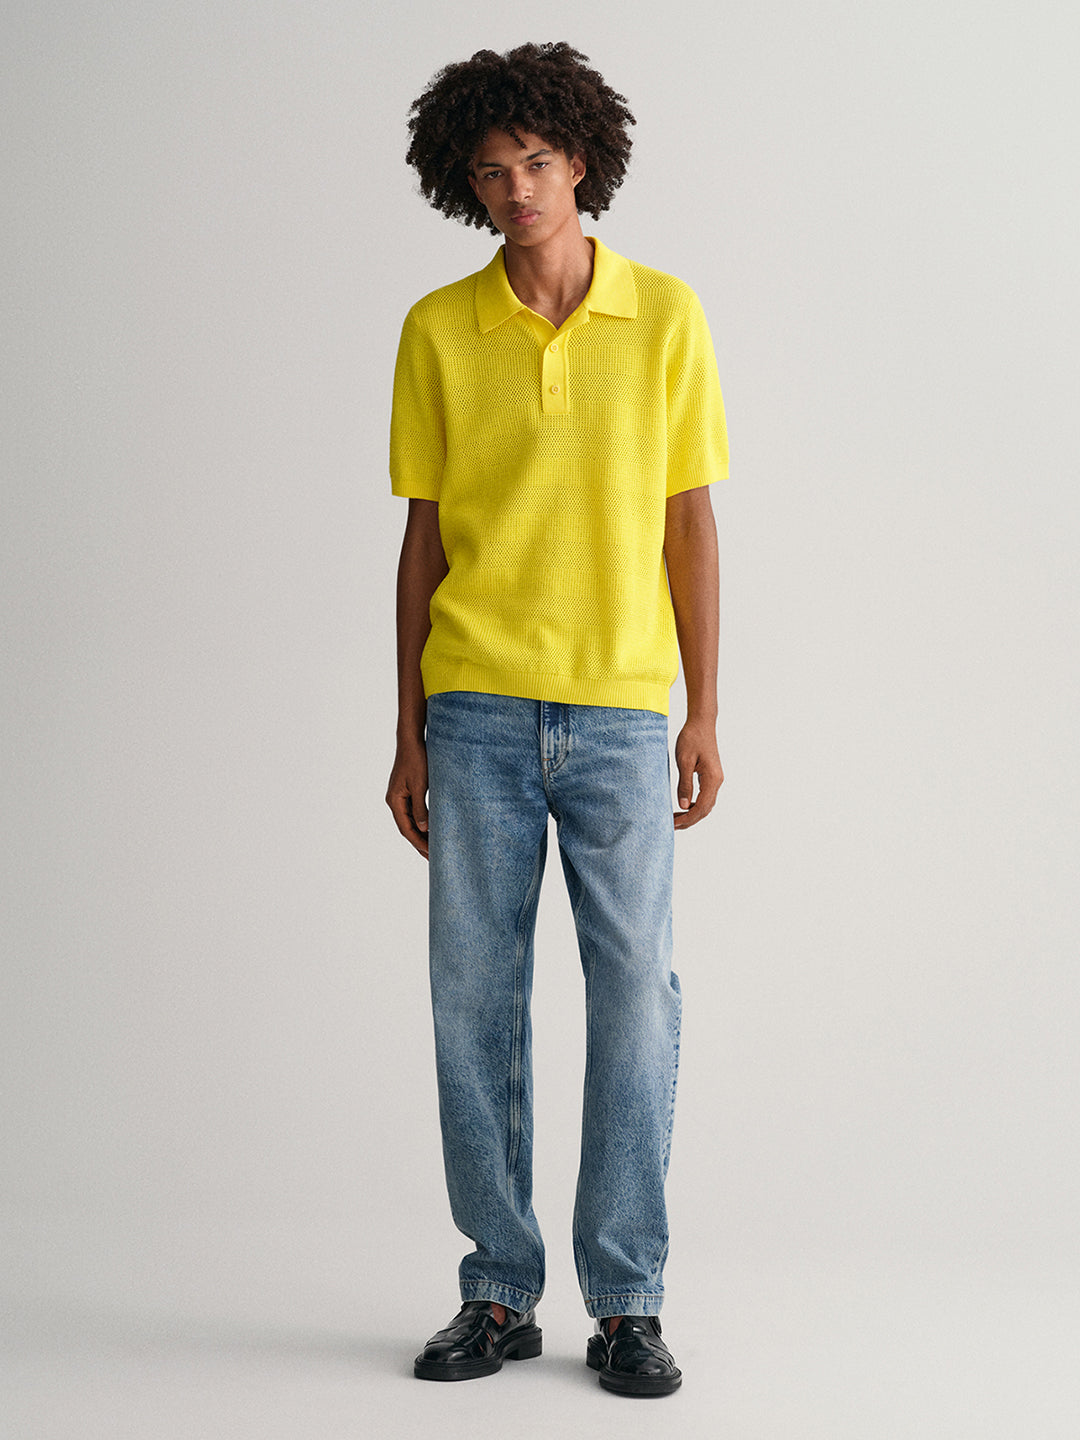 Gant Yellow Relaxed Fit Polo T-Shirt